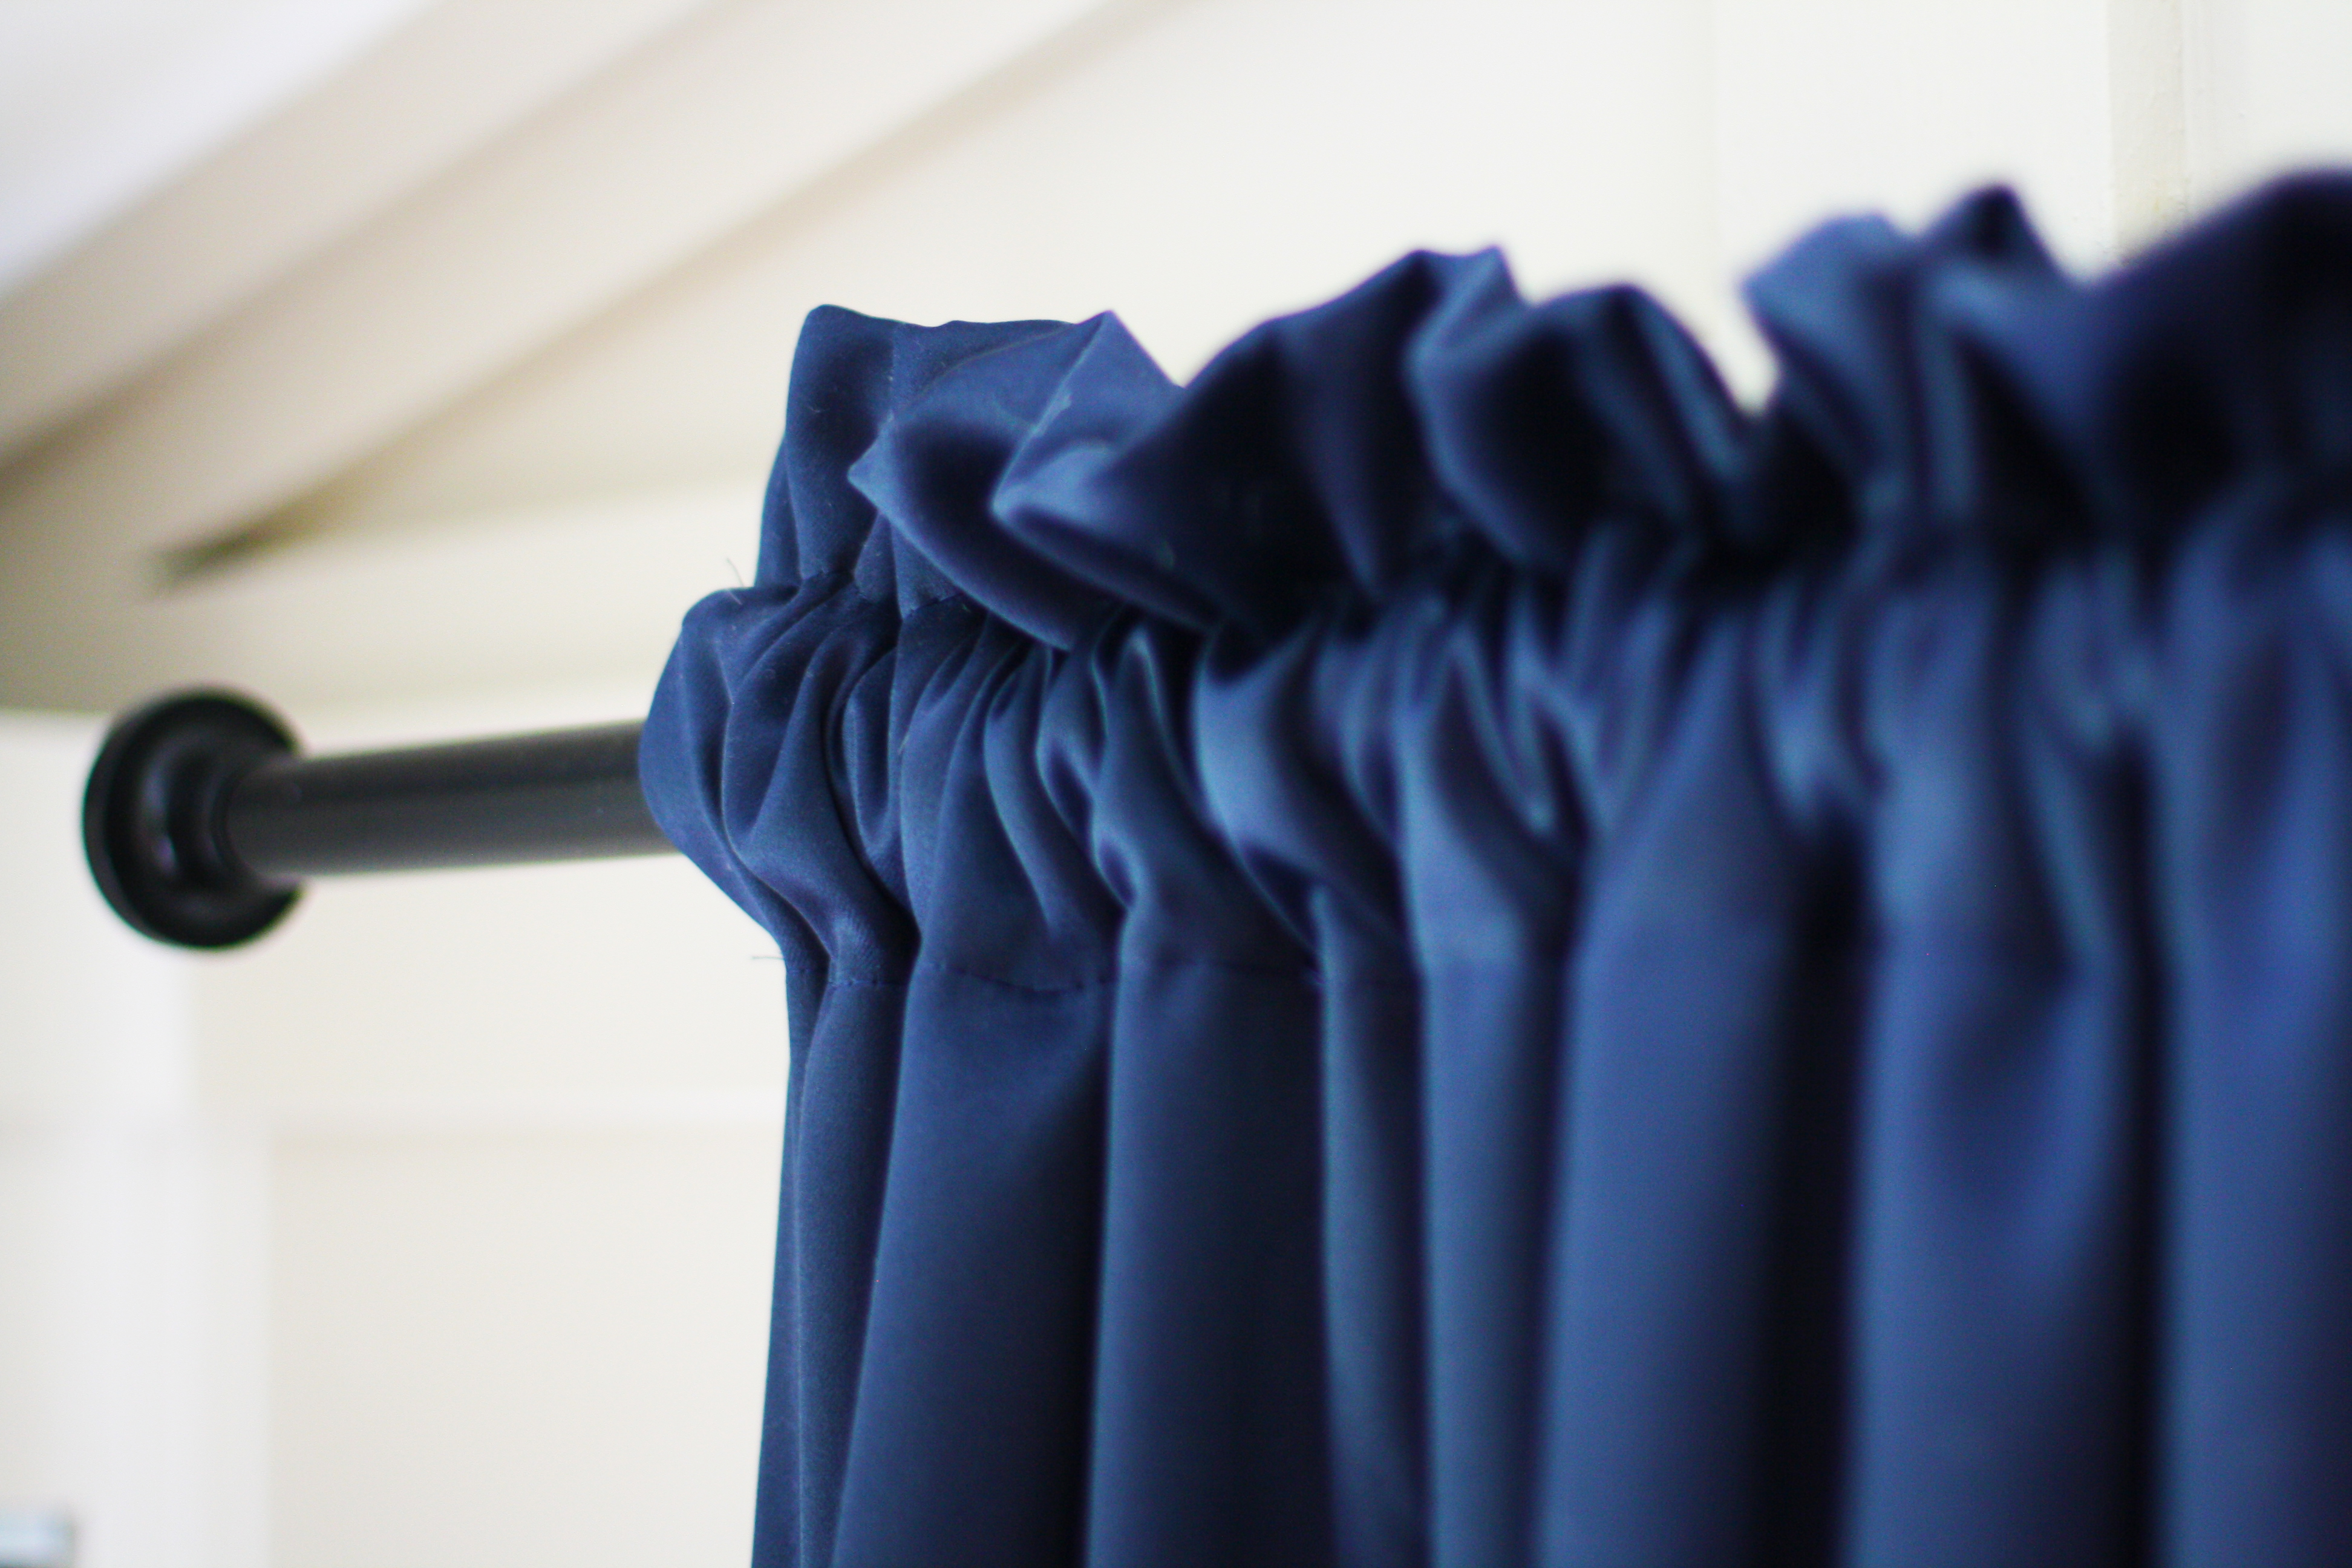 Blue curtain hanging on curtain rod | redleafstyle.com